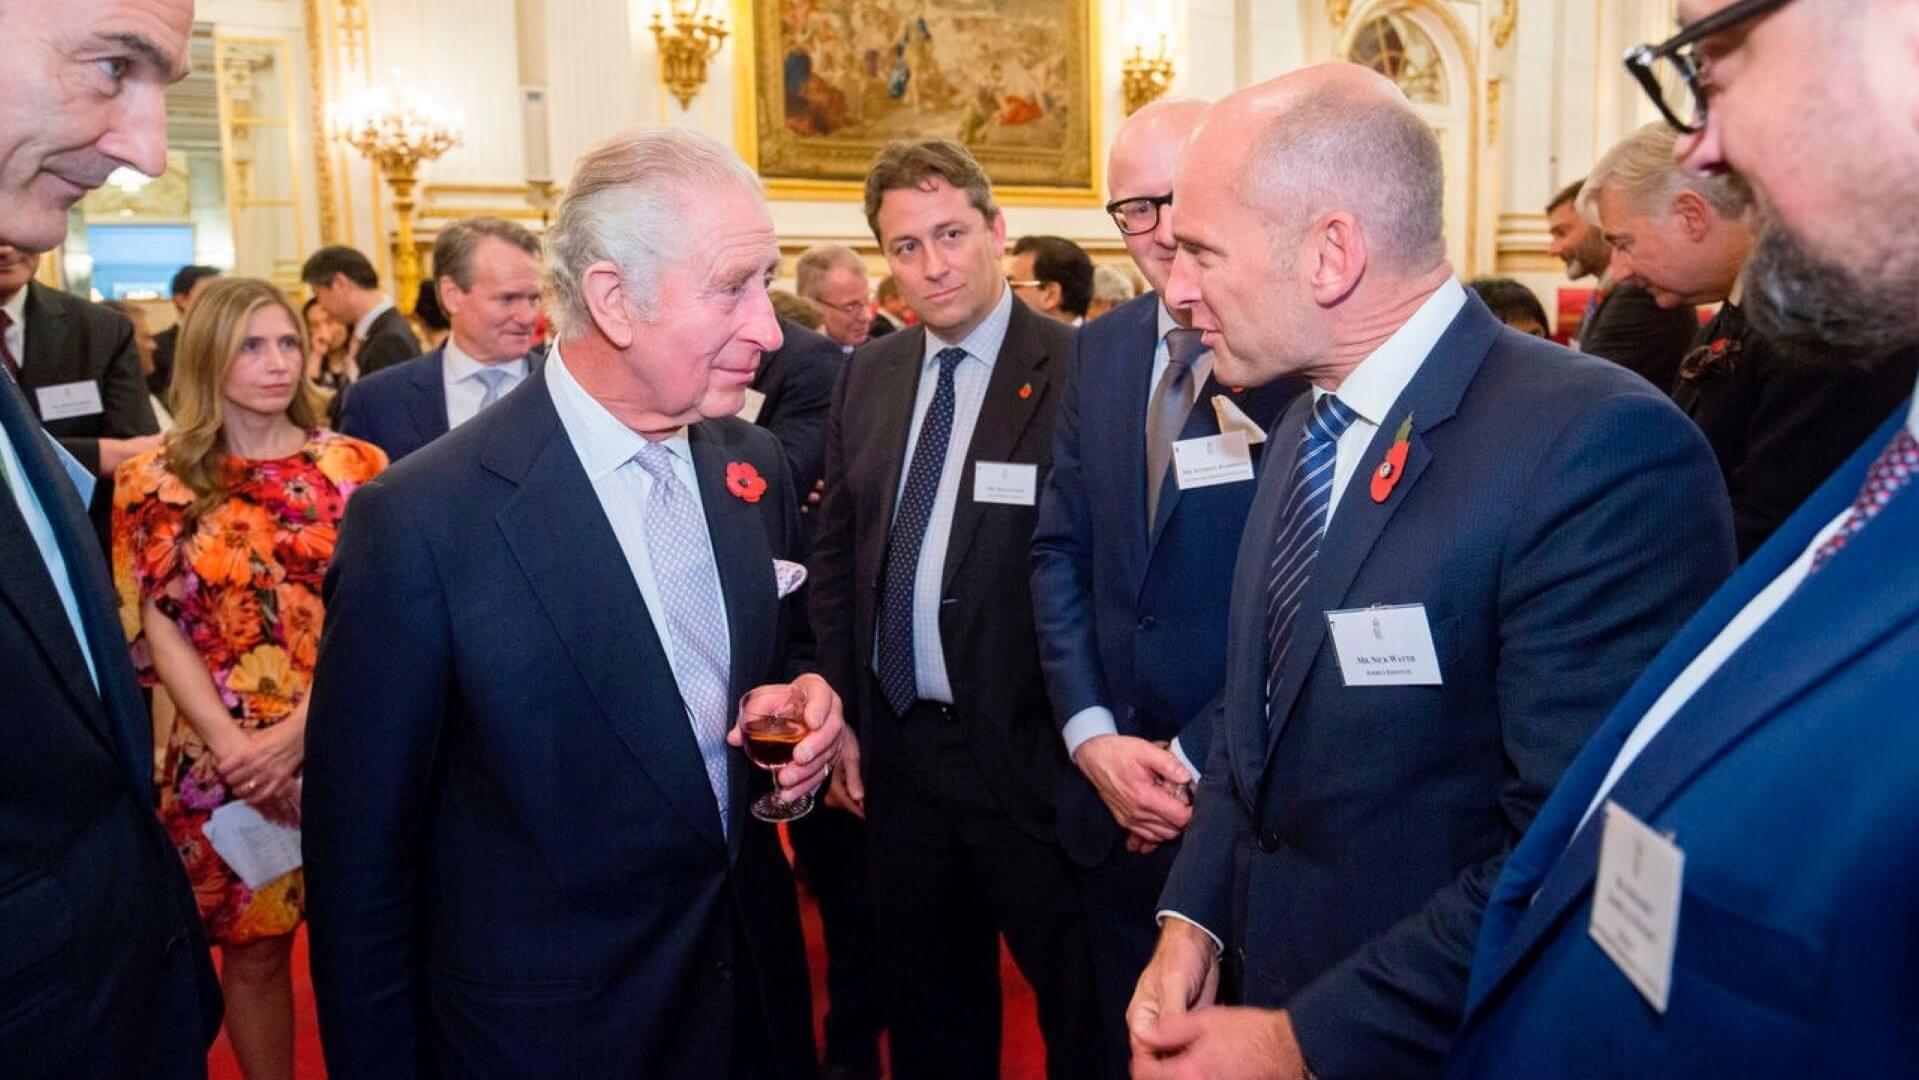 HM King Charles III, EI CEO Nick Wayth CEng FEI and others at Buckingham Palace function